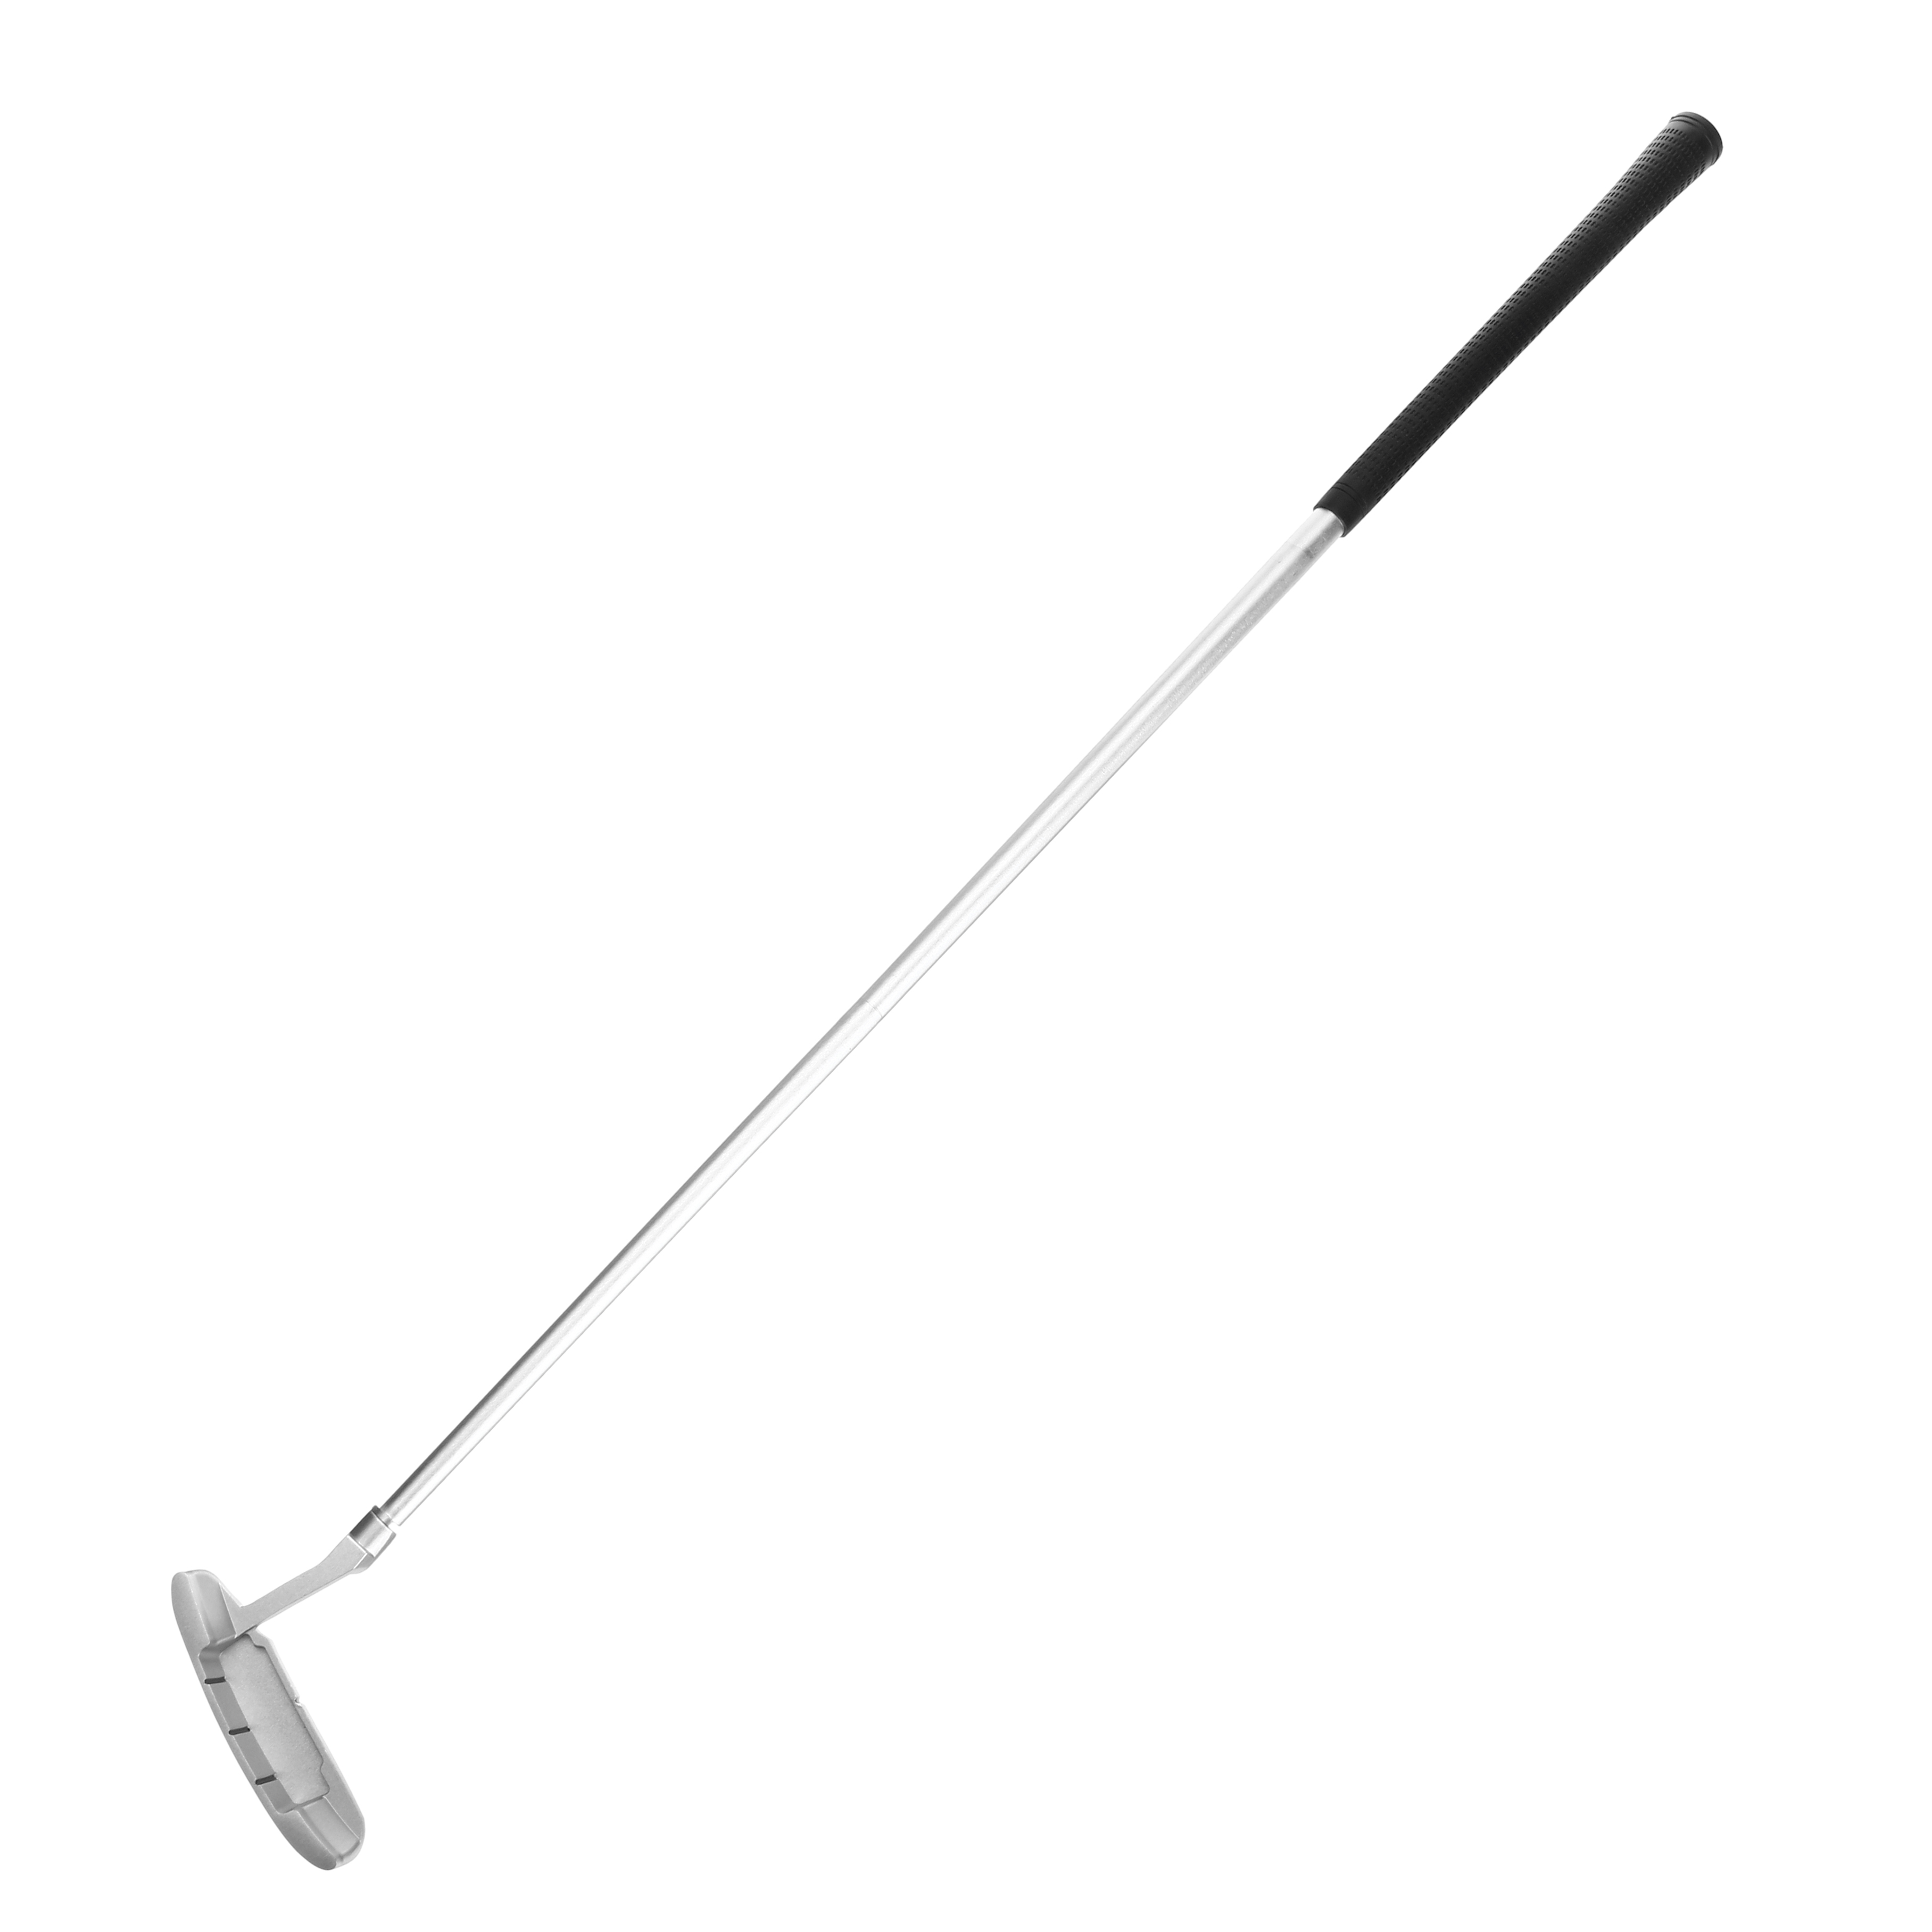 Removable-Golf-Alignment-Stick-Chipping-Swing-Trainer-Sport-Golf-Pole-with-Golf-Ball-1707297-2